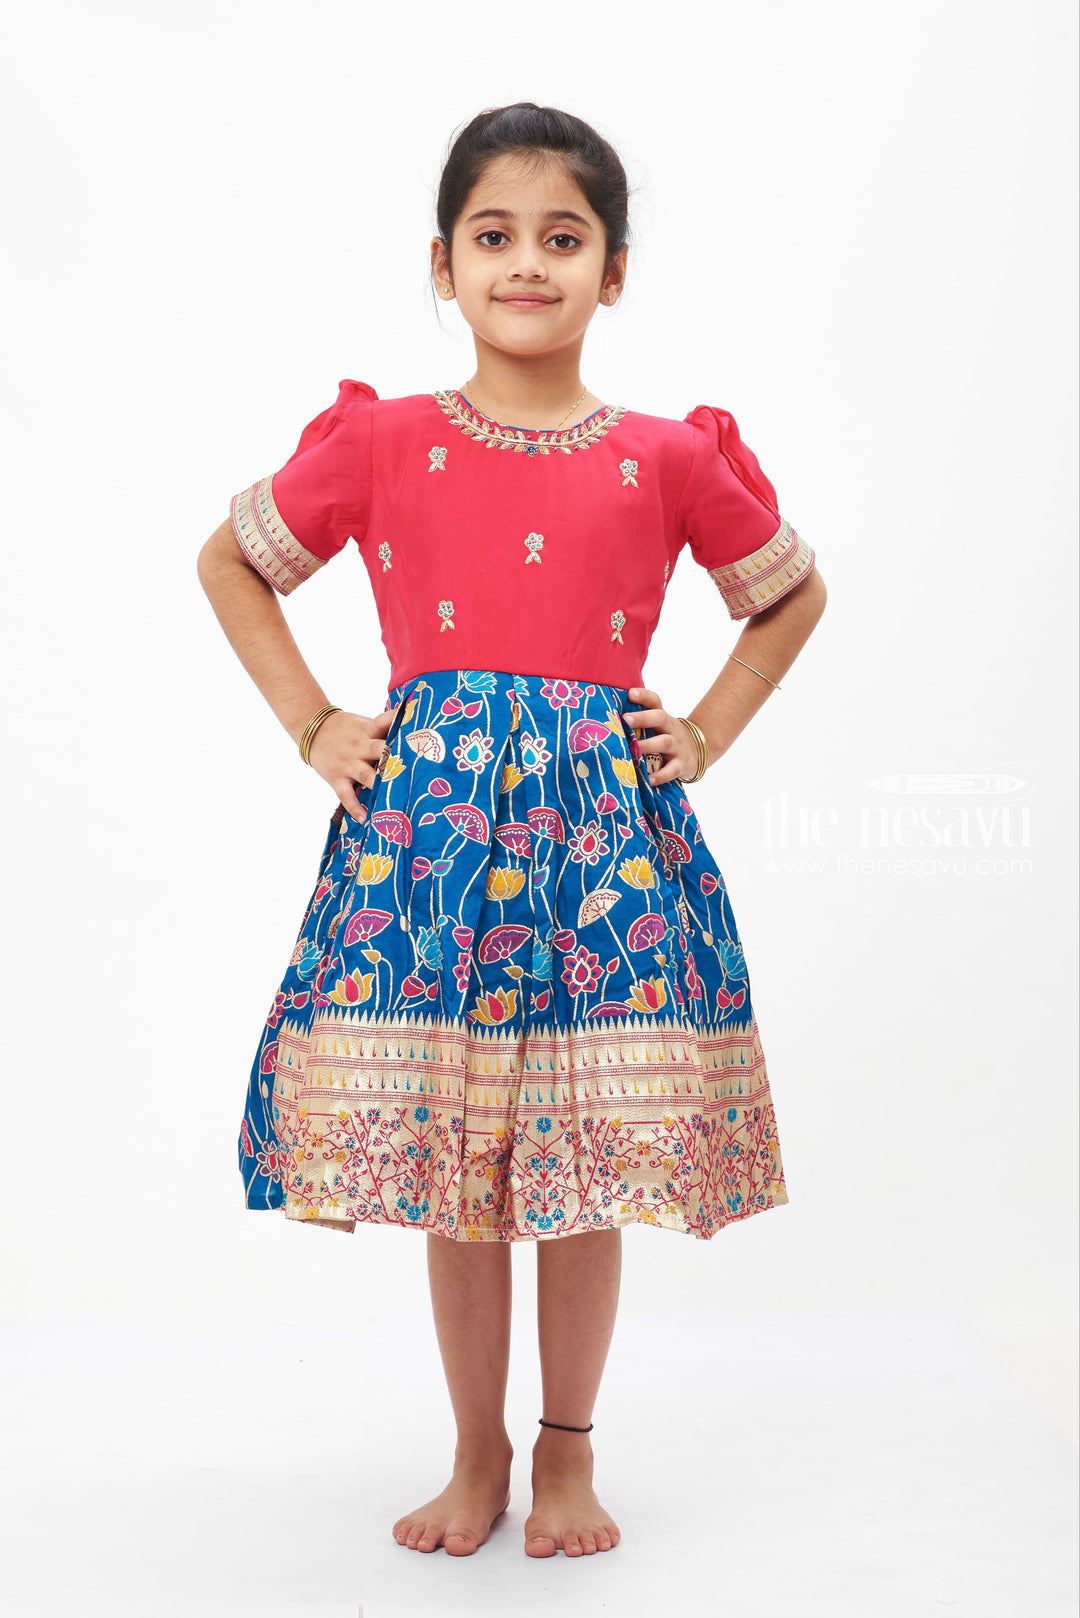 The Nesavu Silk Embroidered Frock Girls' Luxurious Pink and Blue Embroidered Silk Party Frock with Floral Motifs Nesavu 16 (1Y) / Blue SF739A-16 Embroidered Silk Floral Frock for Girls | Pink and Blue Traditional Dress | The Nesavu